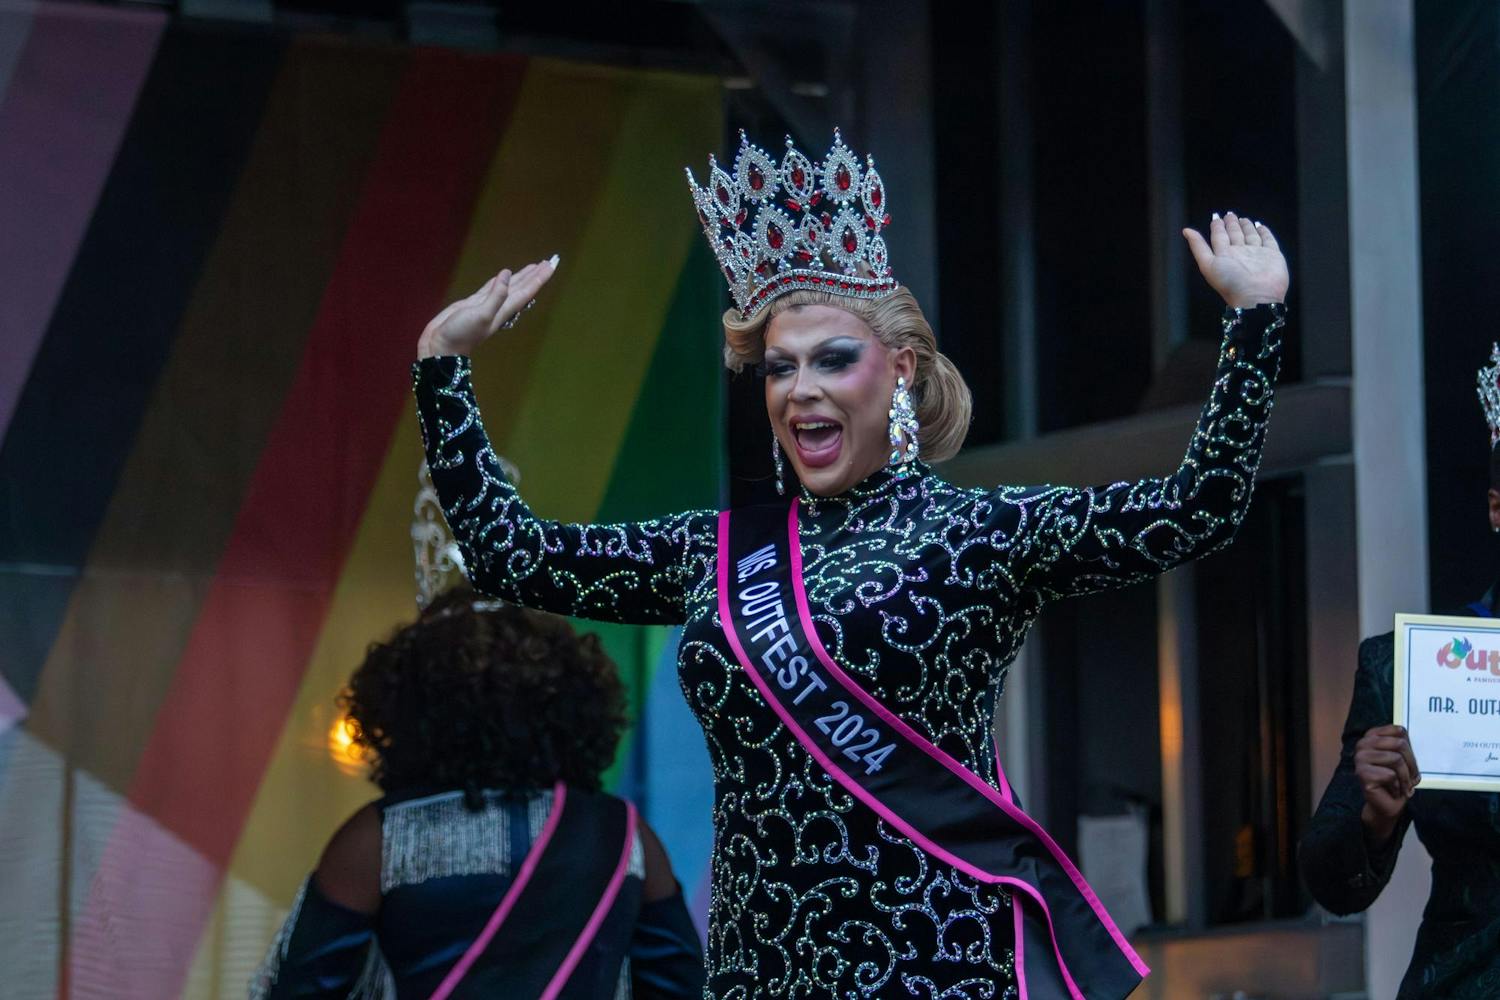 Drag performer Colbi J with her hands raised after winning Ms. Outfest 2024 on June 1, 2024. Outfest, hosted by South Carolina Pride, also has a drag pageant with three different titles to win: Mr., Ms., and Mx.